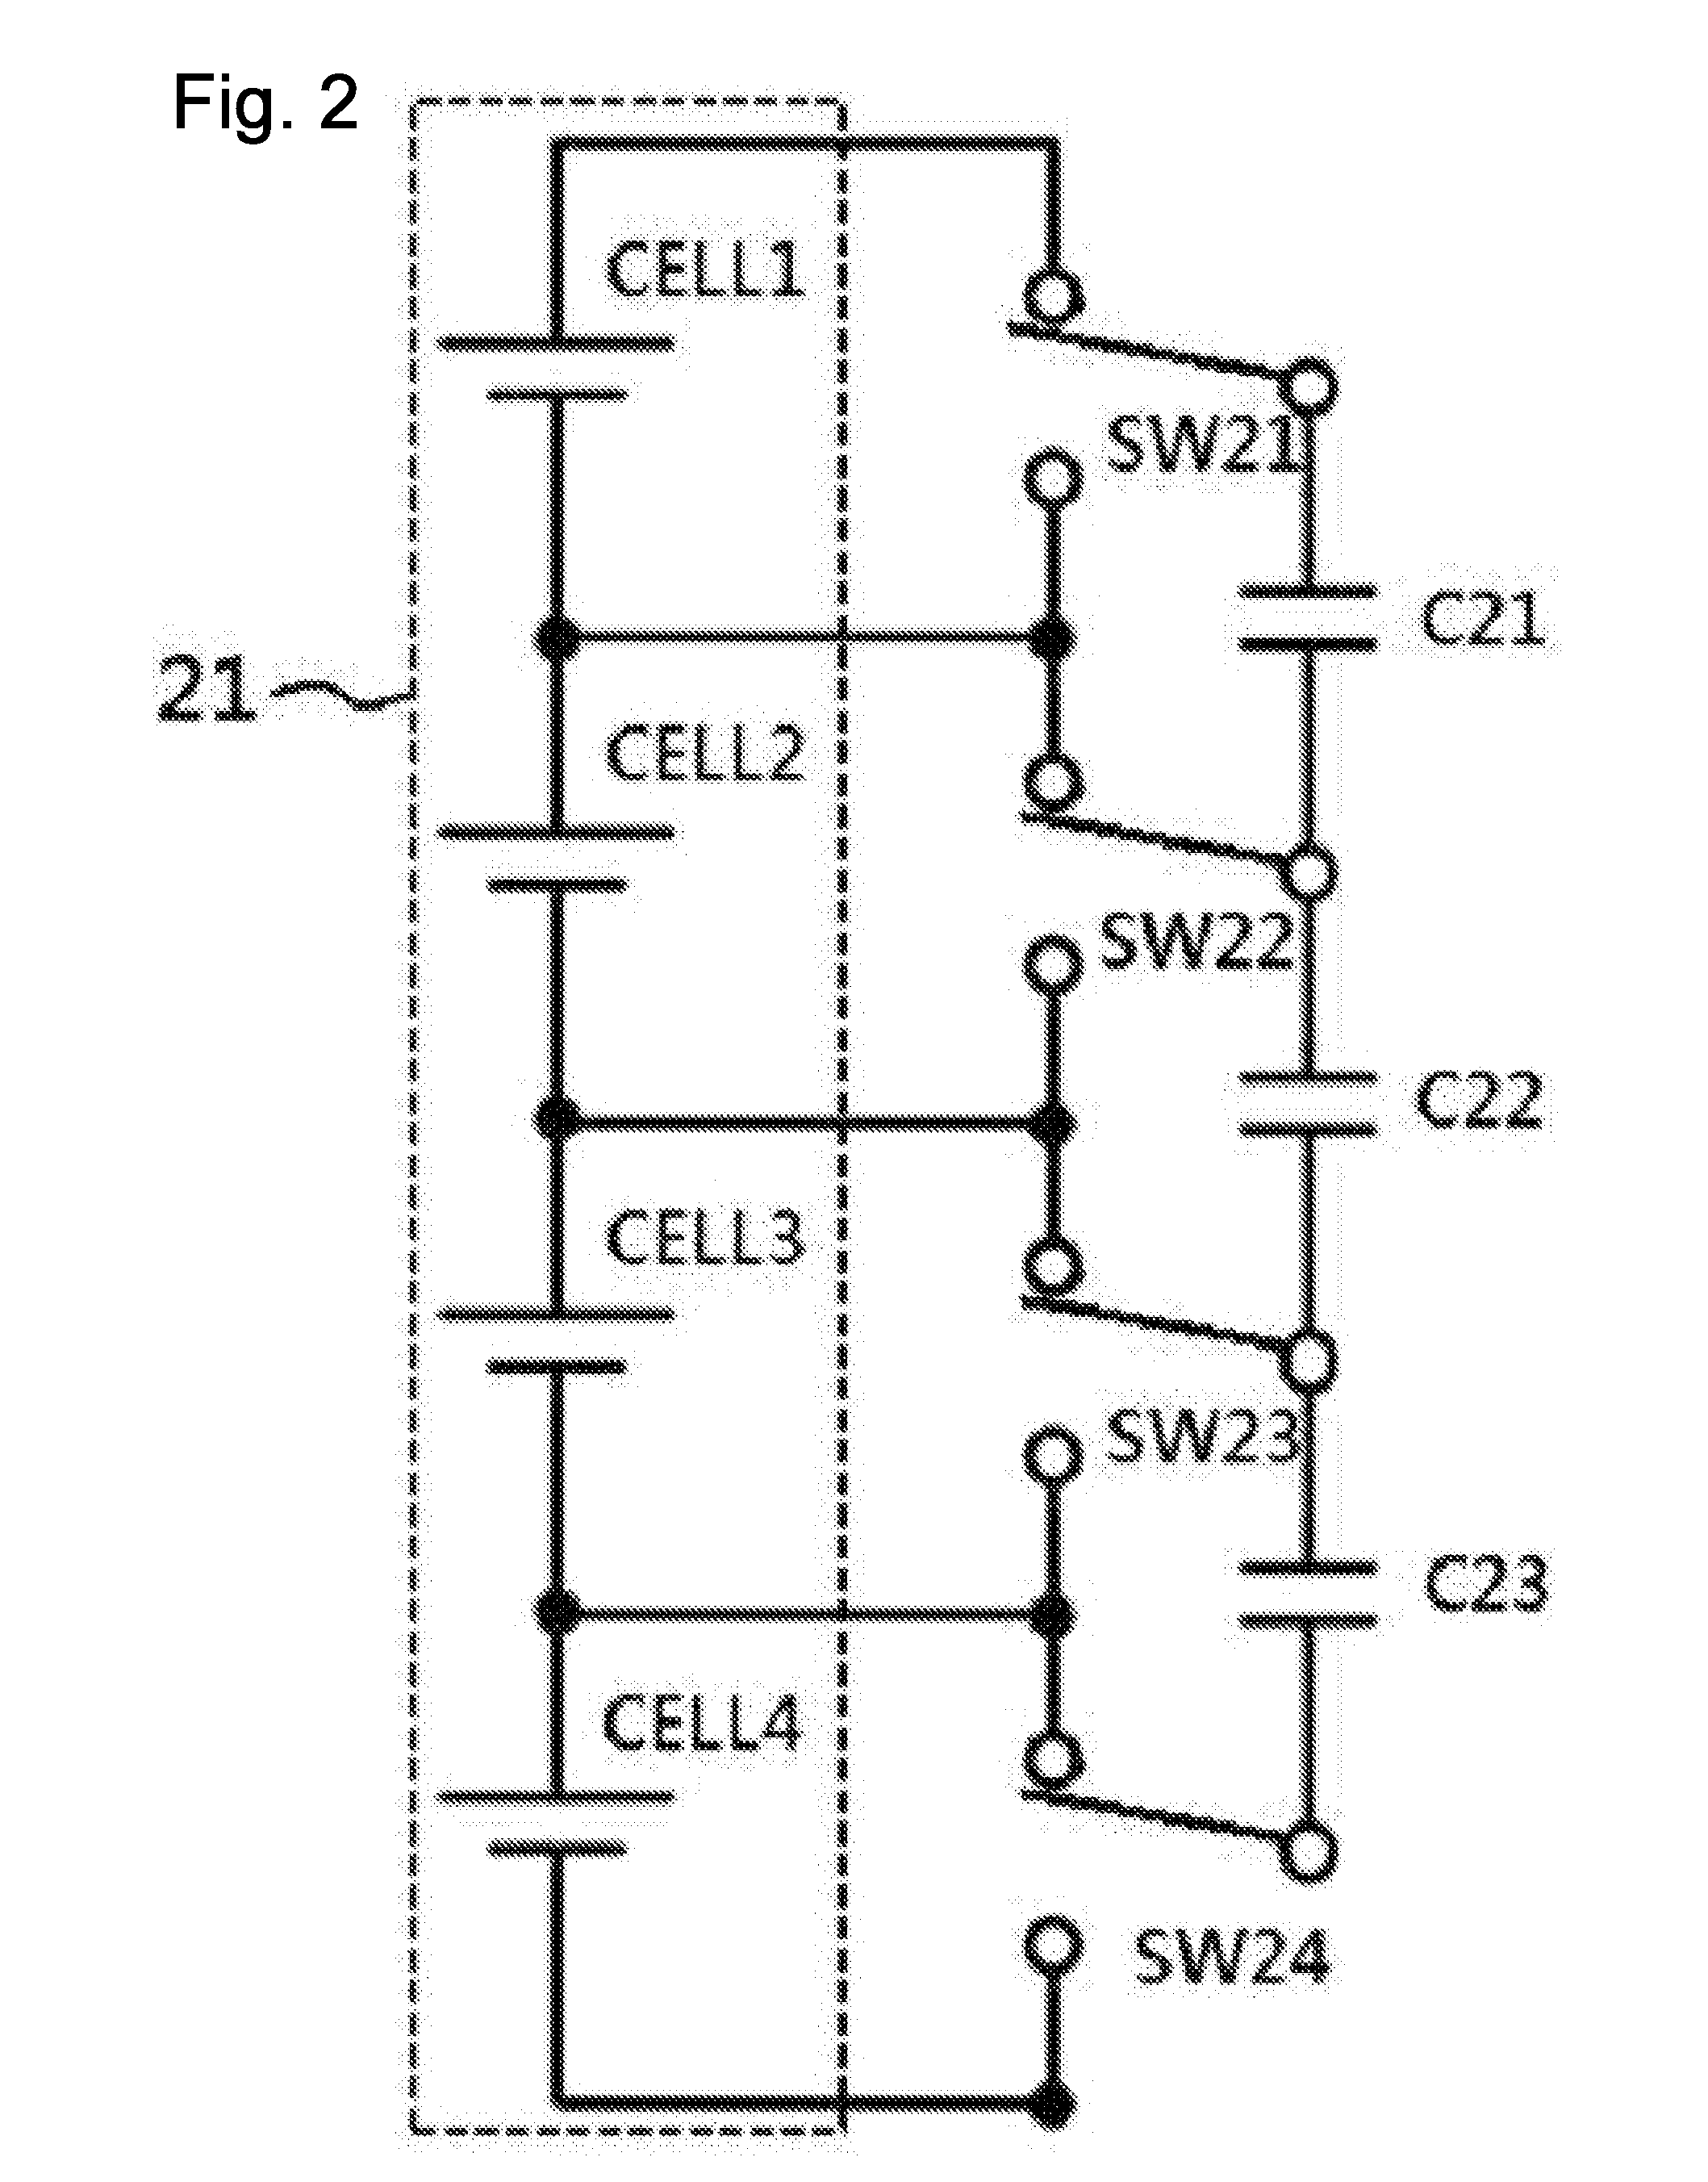 Balancing control circuit for battery cell module using lc series resonant circuit